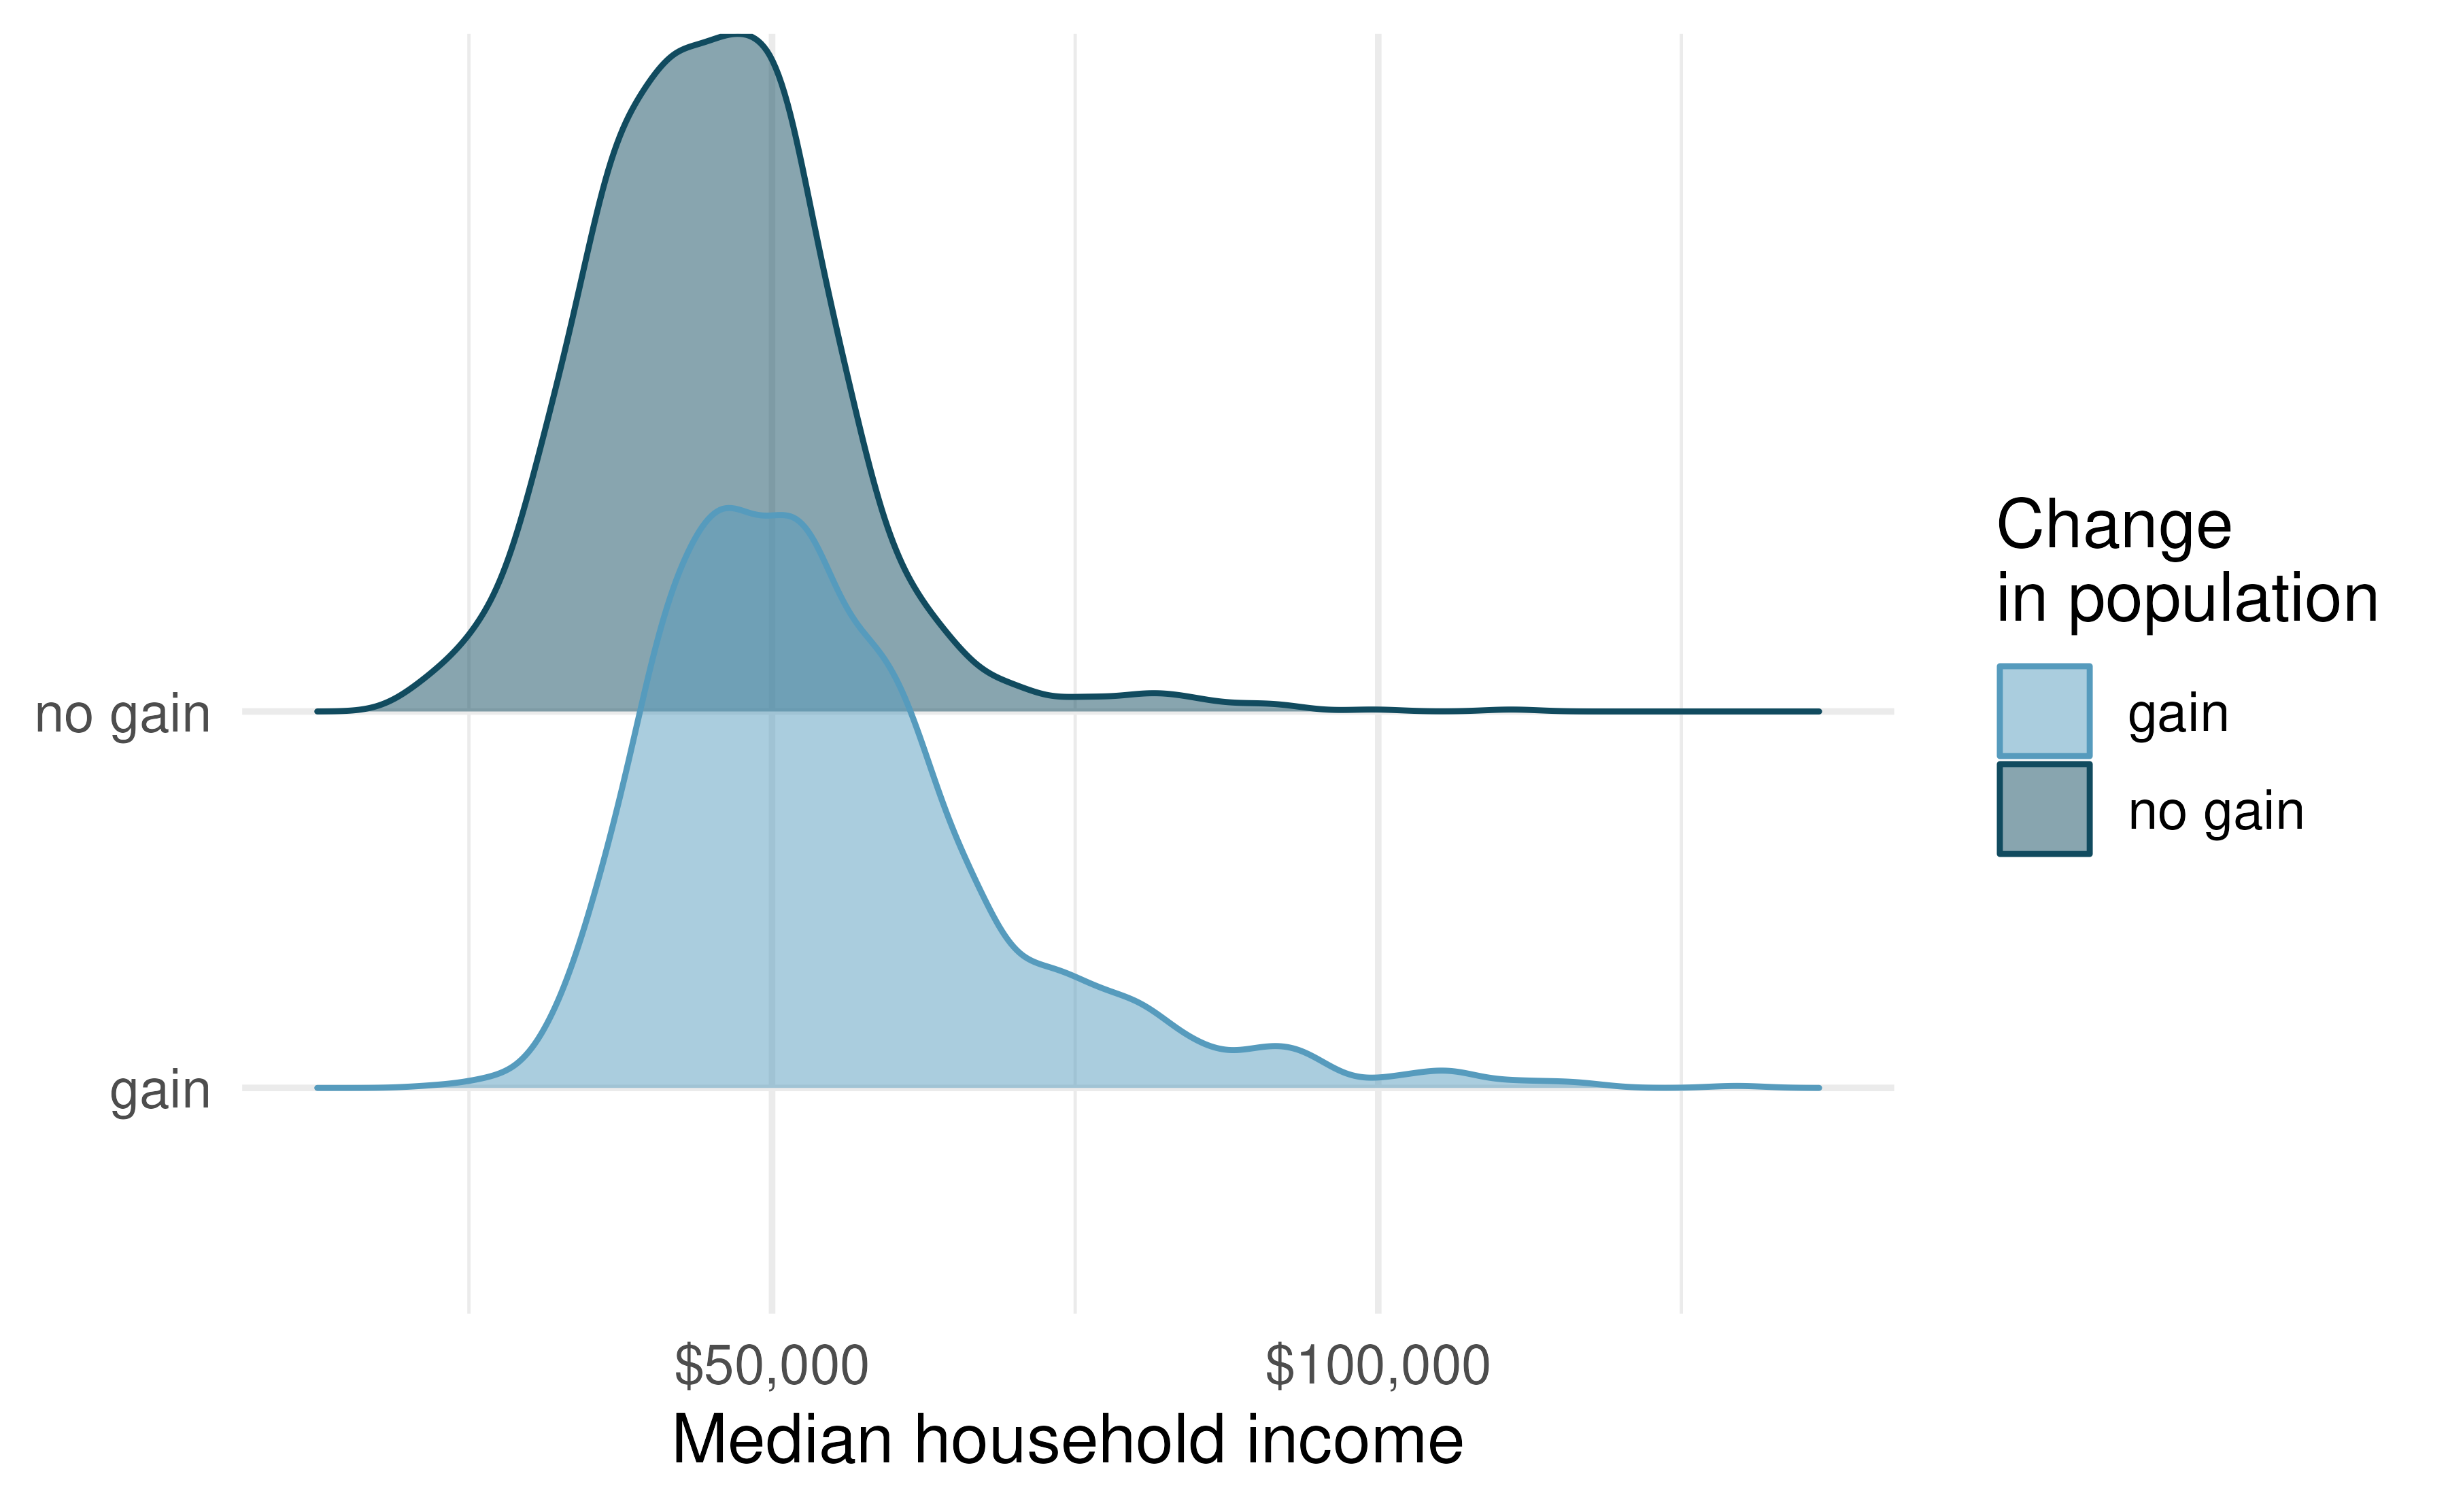 Ridge plot for median household income, where counties are split by whether there was a population gain or not.